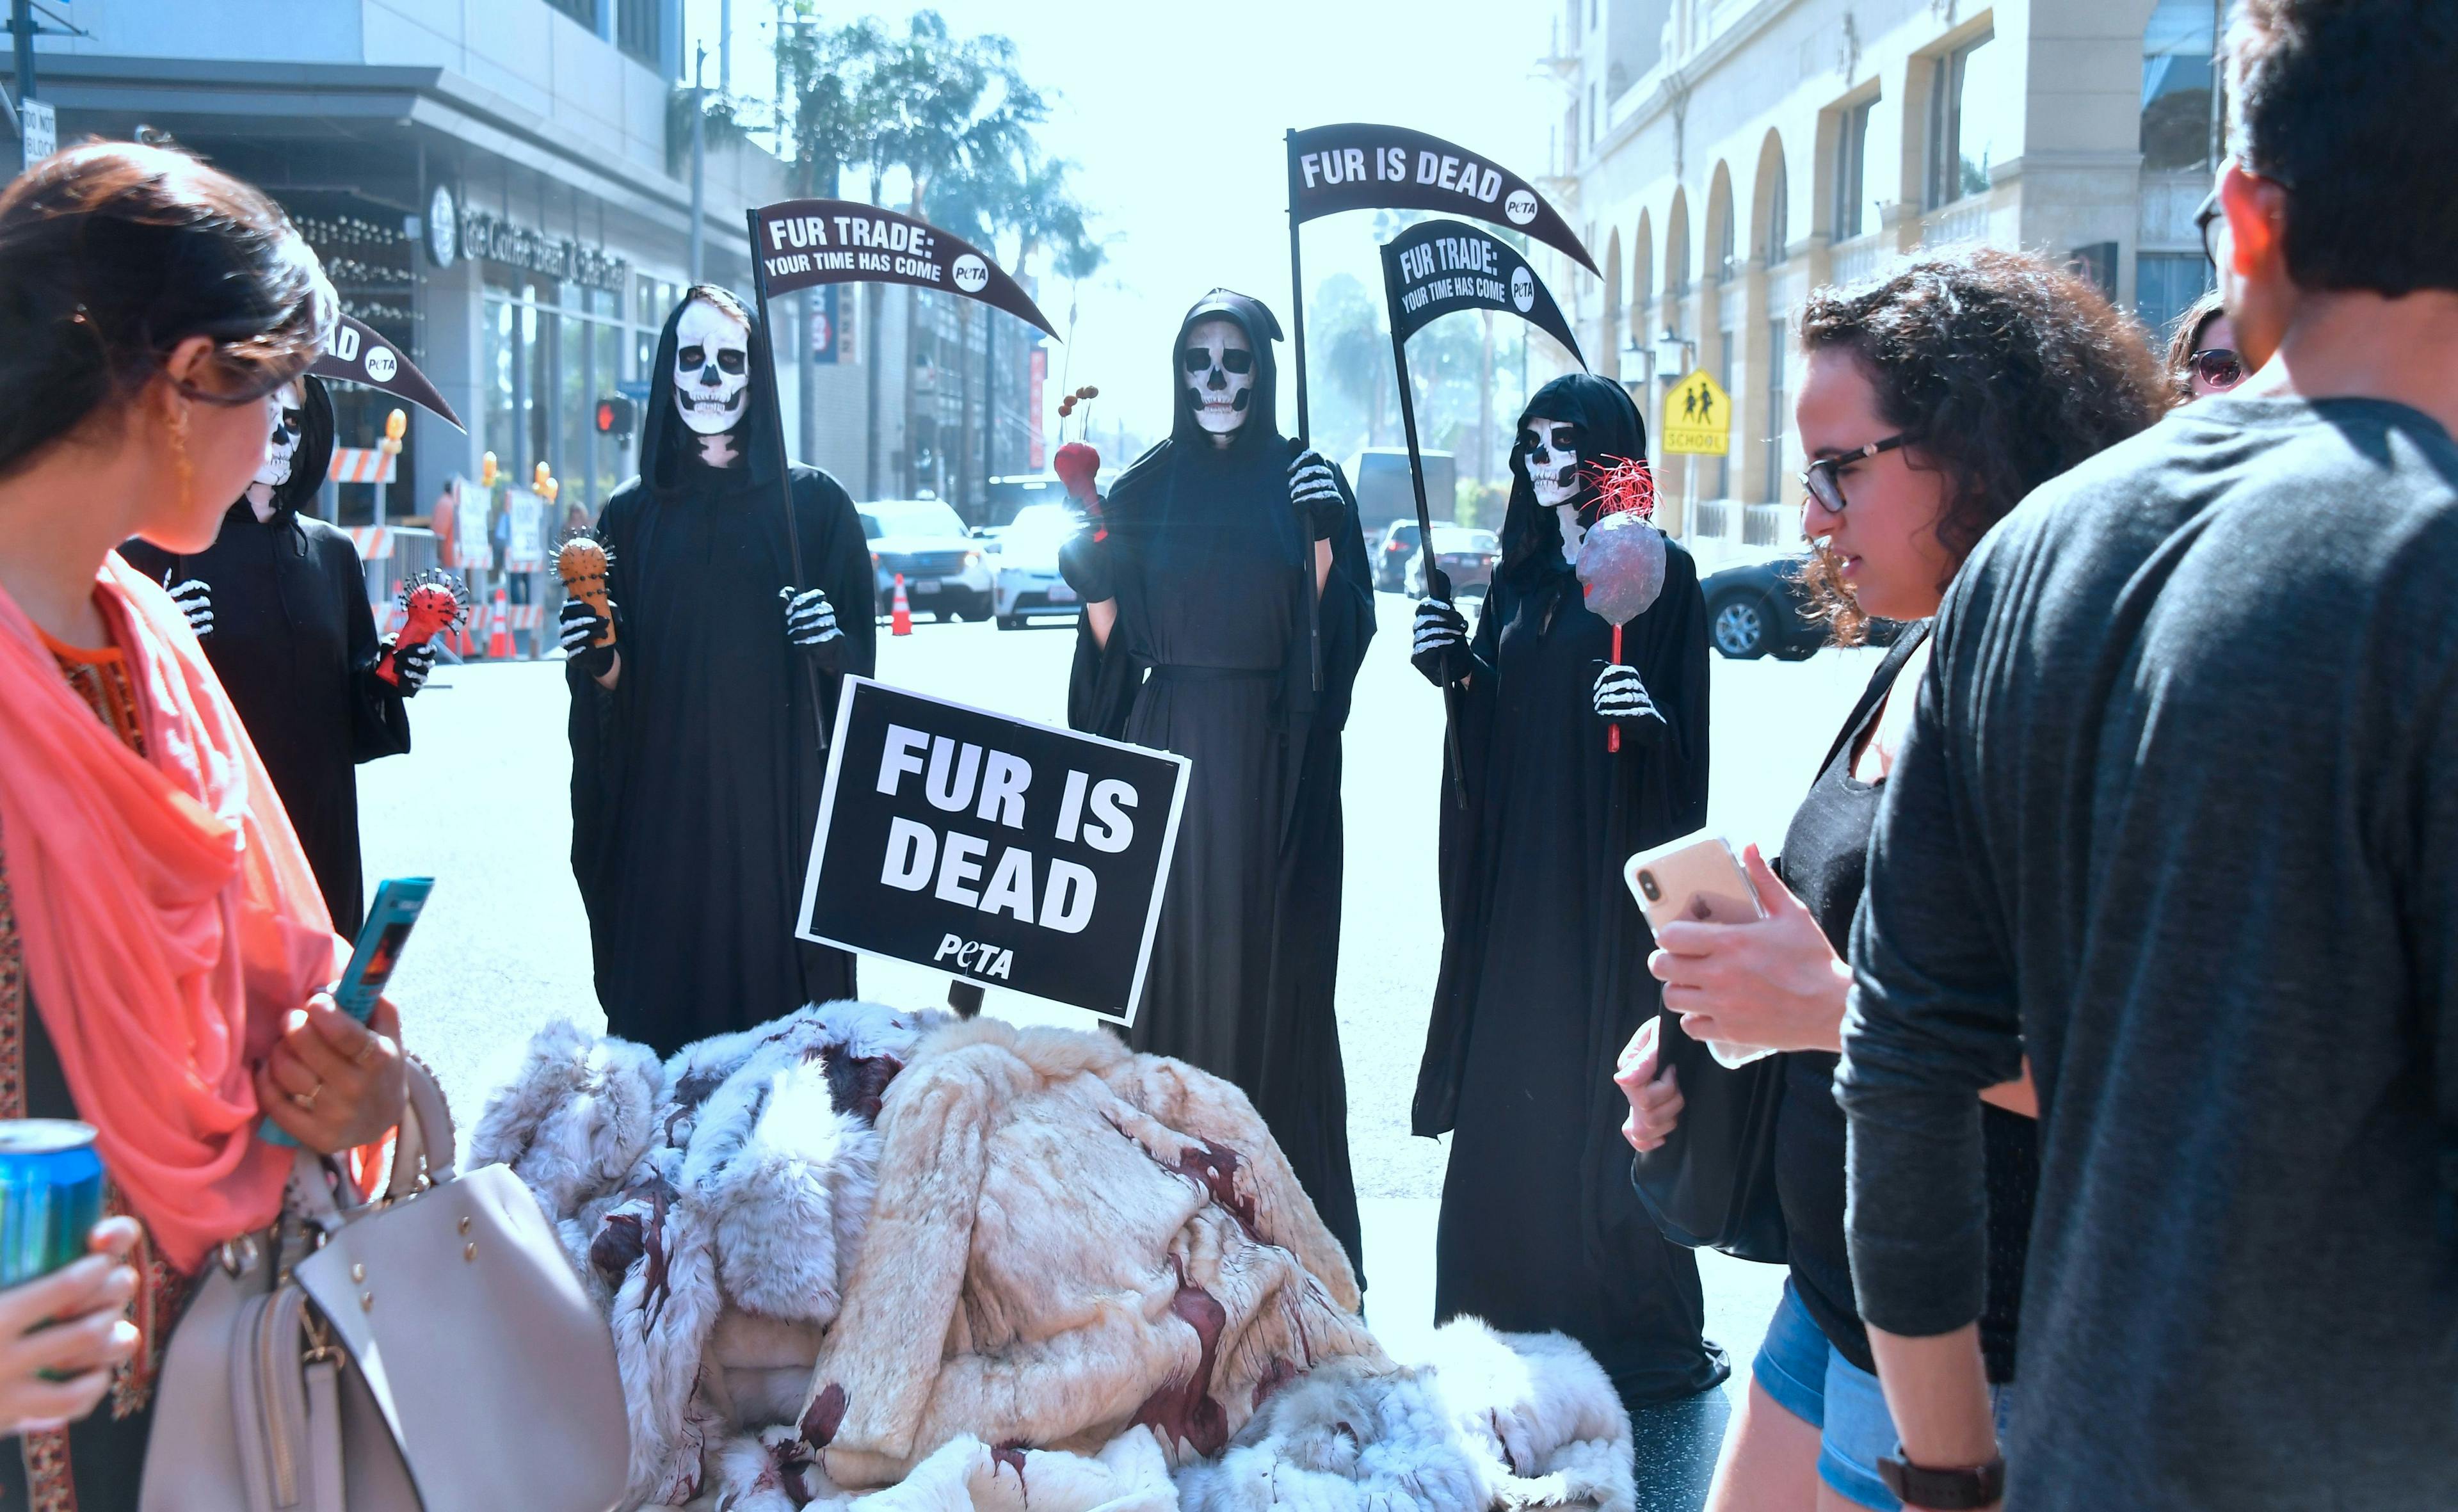 Pedestrians walk past PETA activists dressed as Grim Reapers holding a "Fur is Dead" rally